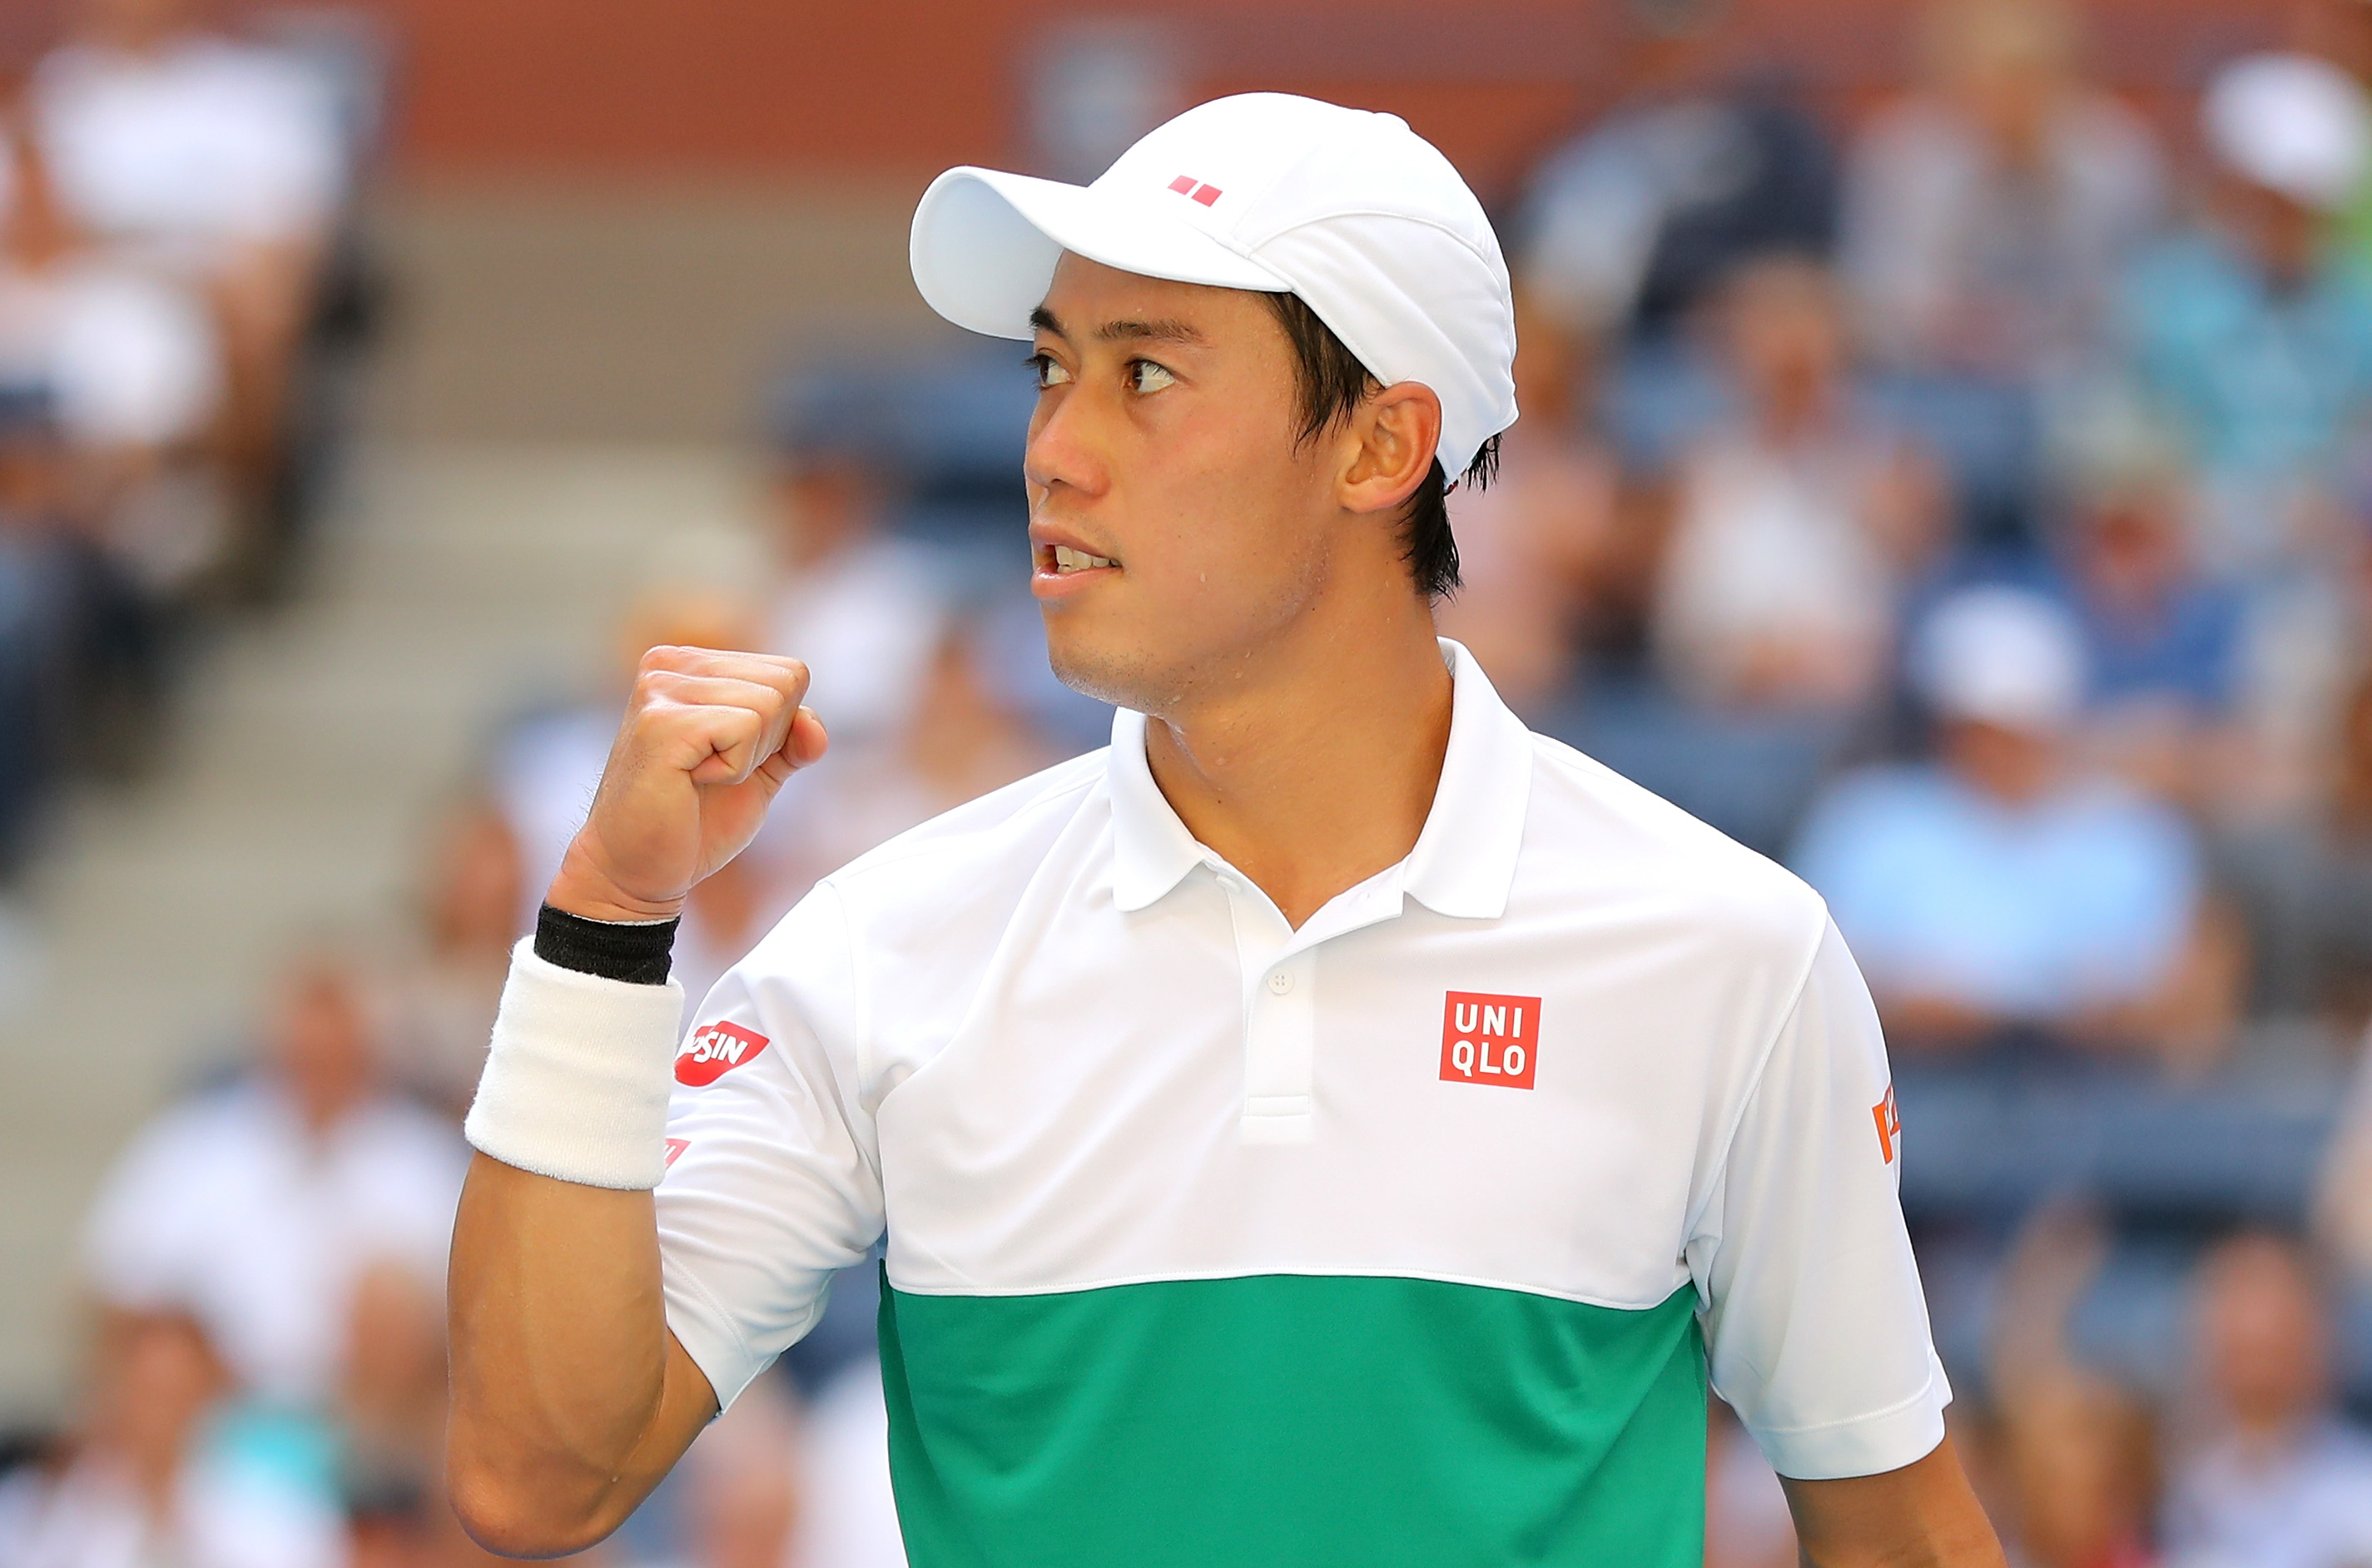 Five-set thrillers are becoming the norm at Flushing Meadows and Kei Nishikori got the better of Marin Cilic in the latest epic.